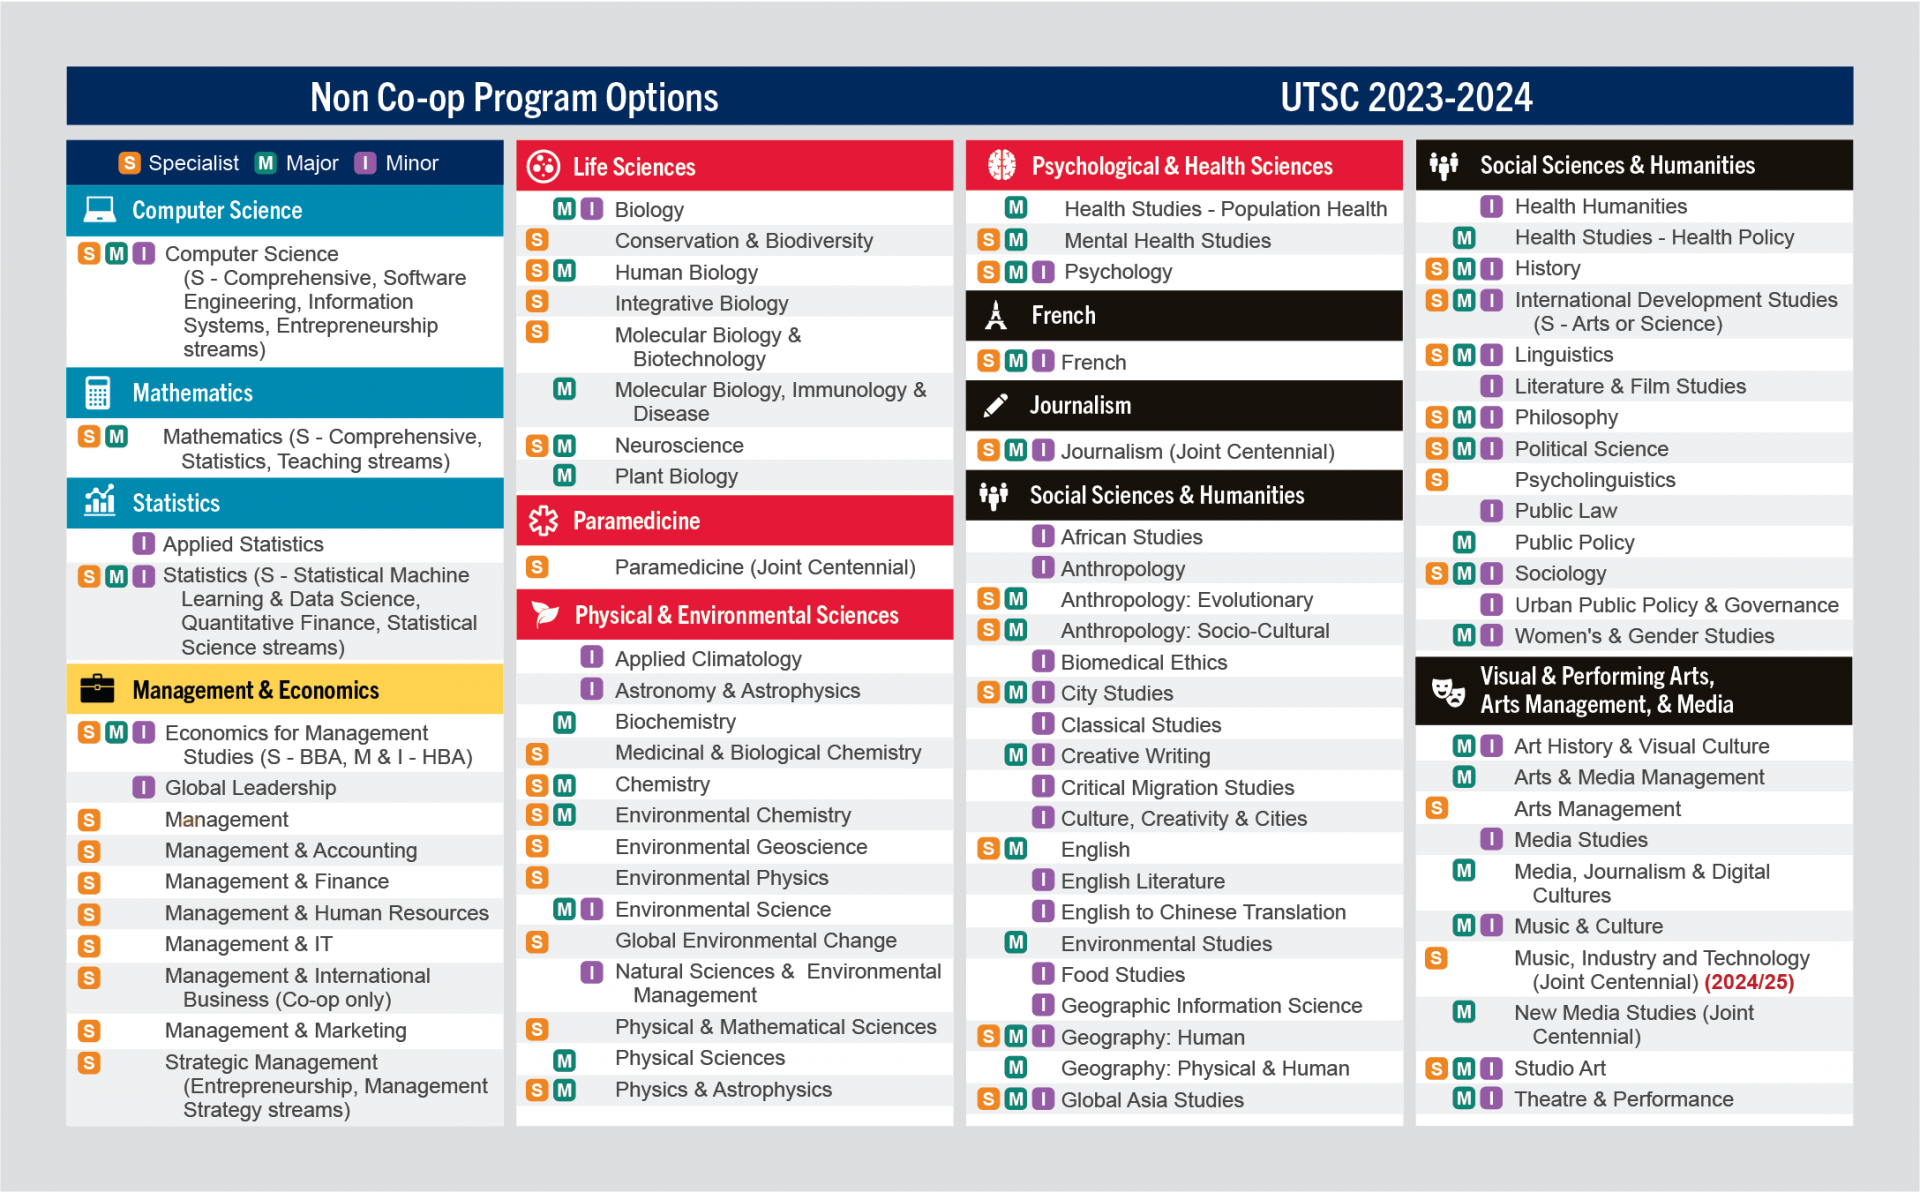 table showing non co-op program options at UTSC